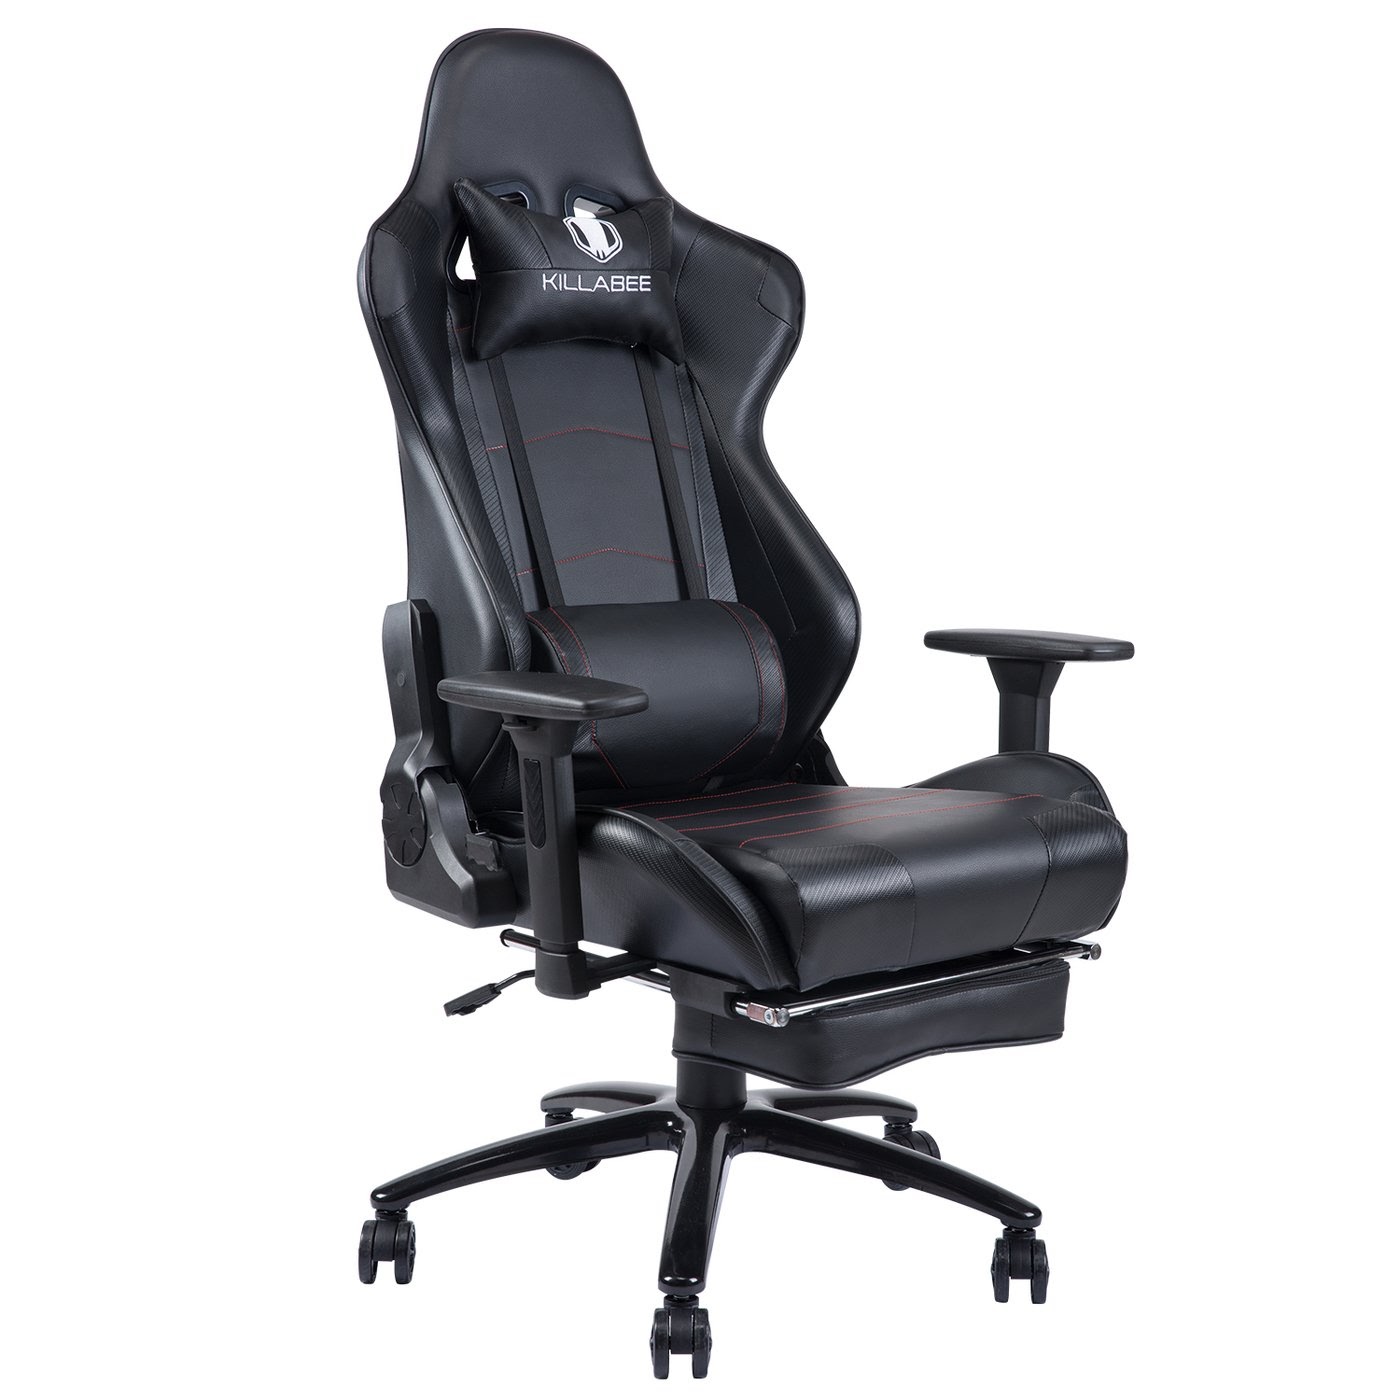 The best gaming chairs for a budget